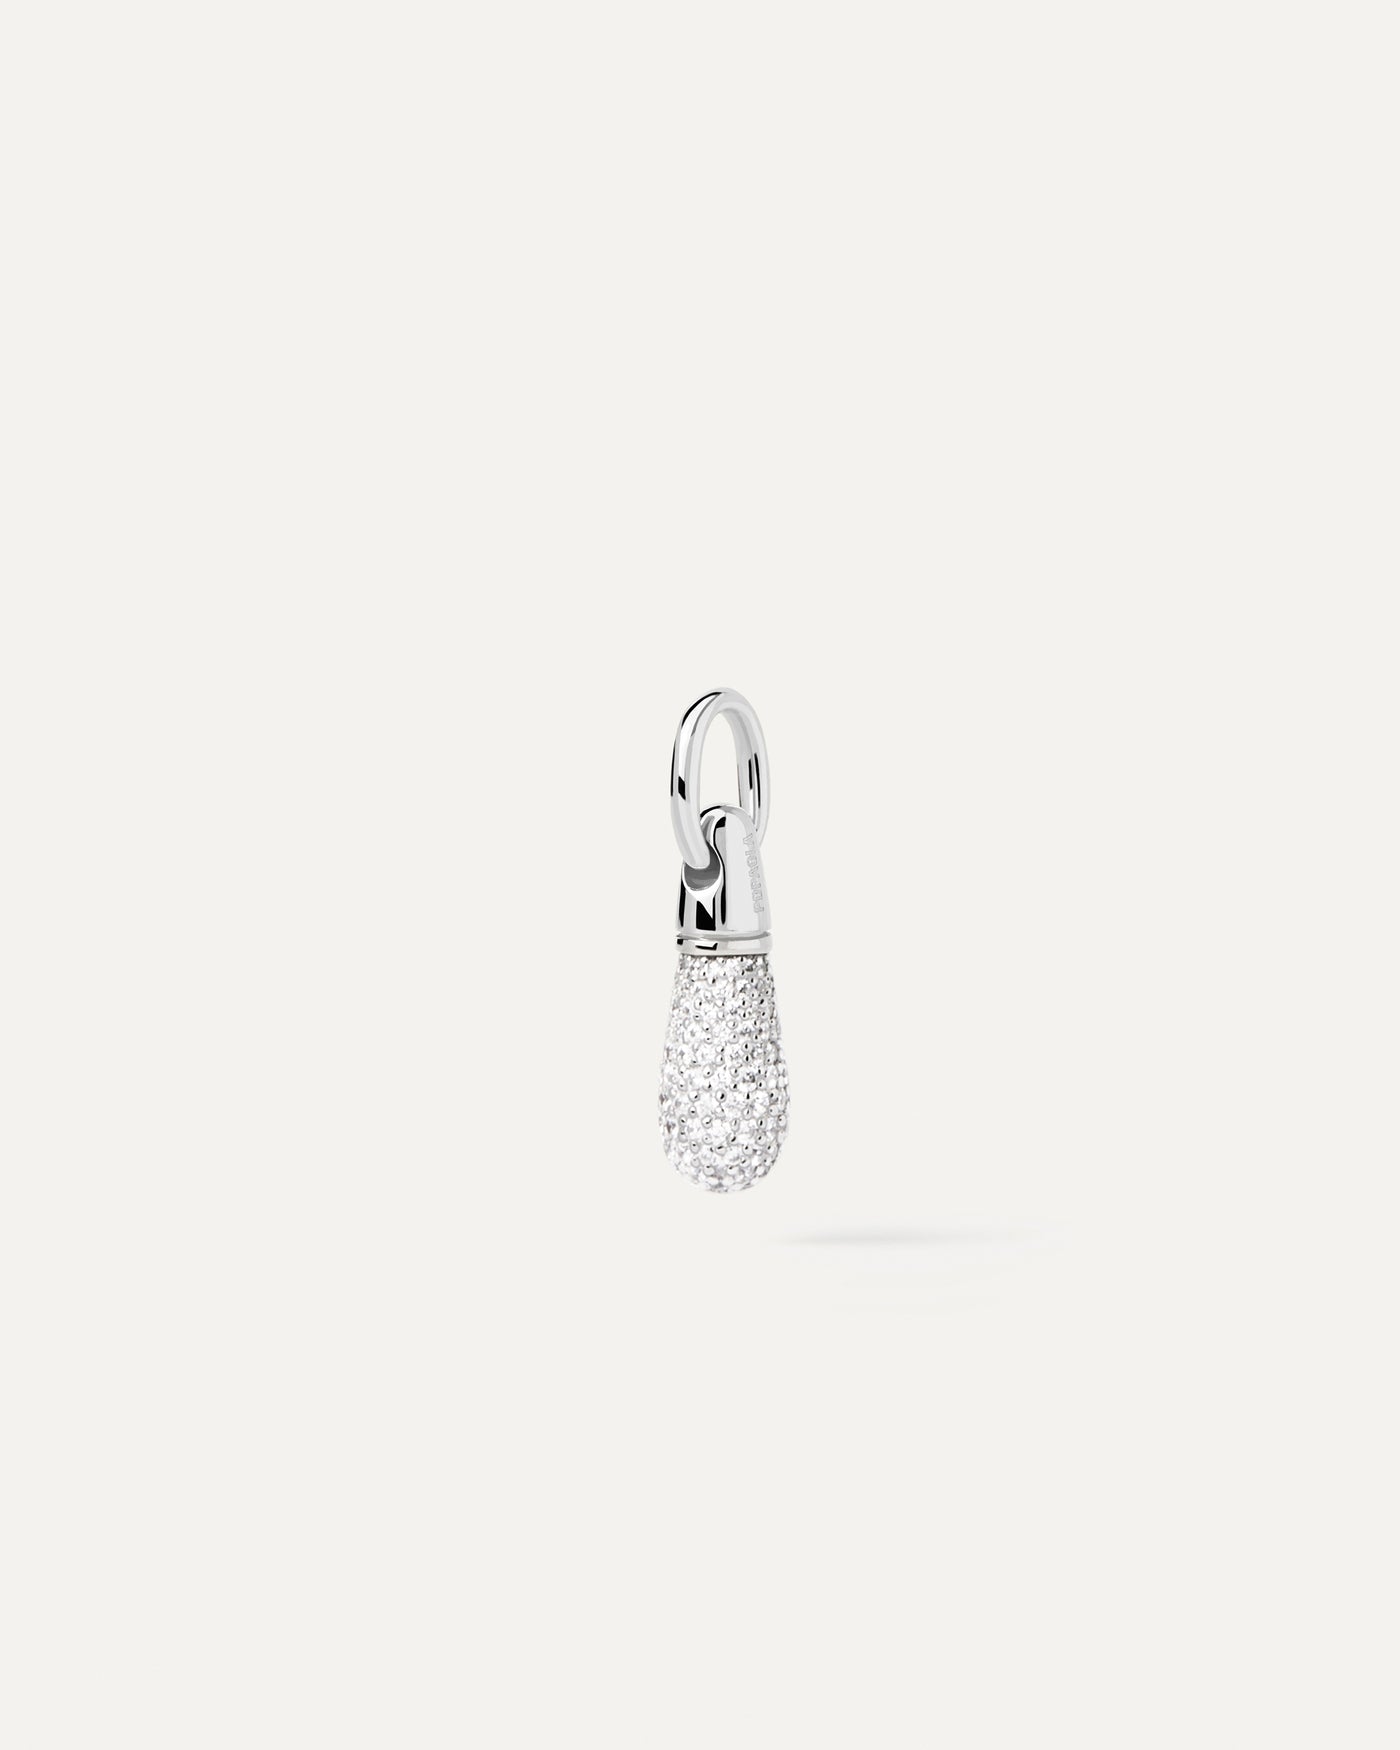 2023 Selection | Pavé Drop Silver Pendant. Get the latest arrival from PDPAOLA. Place your order safely and get this Best Seller. Free Shipping.